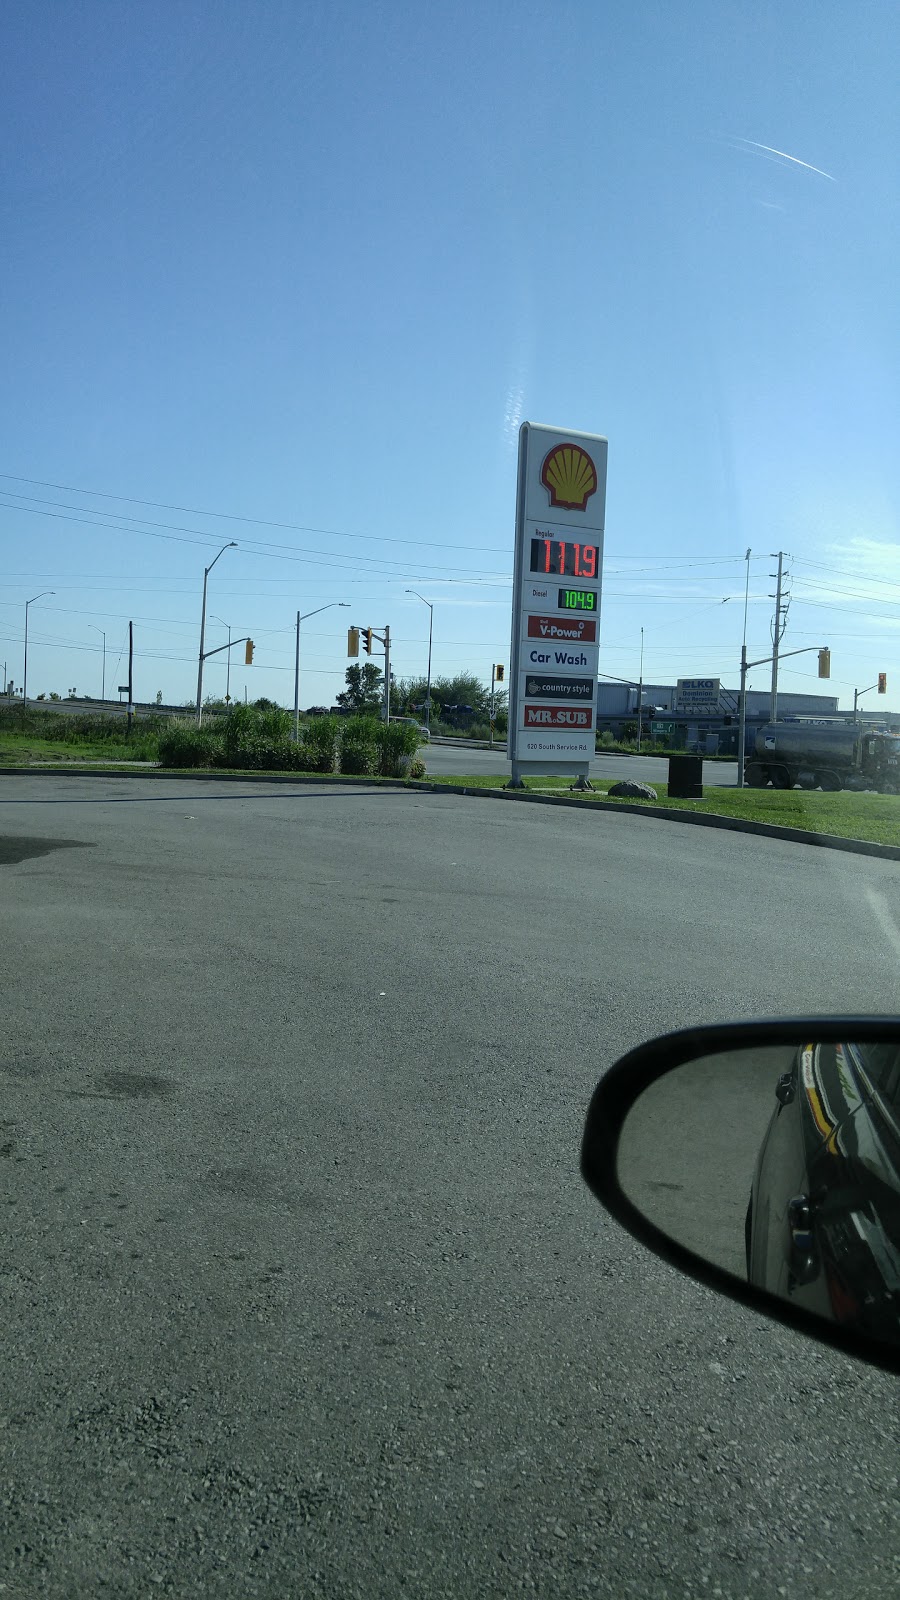 Shell | 620 S Service Rd, Stoney Creek, ON L8E 2W1, Canada | Phone: (905) 643-6661